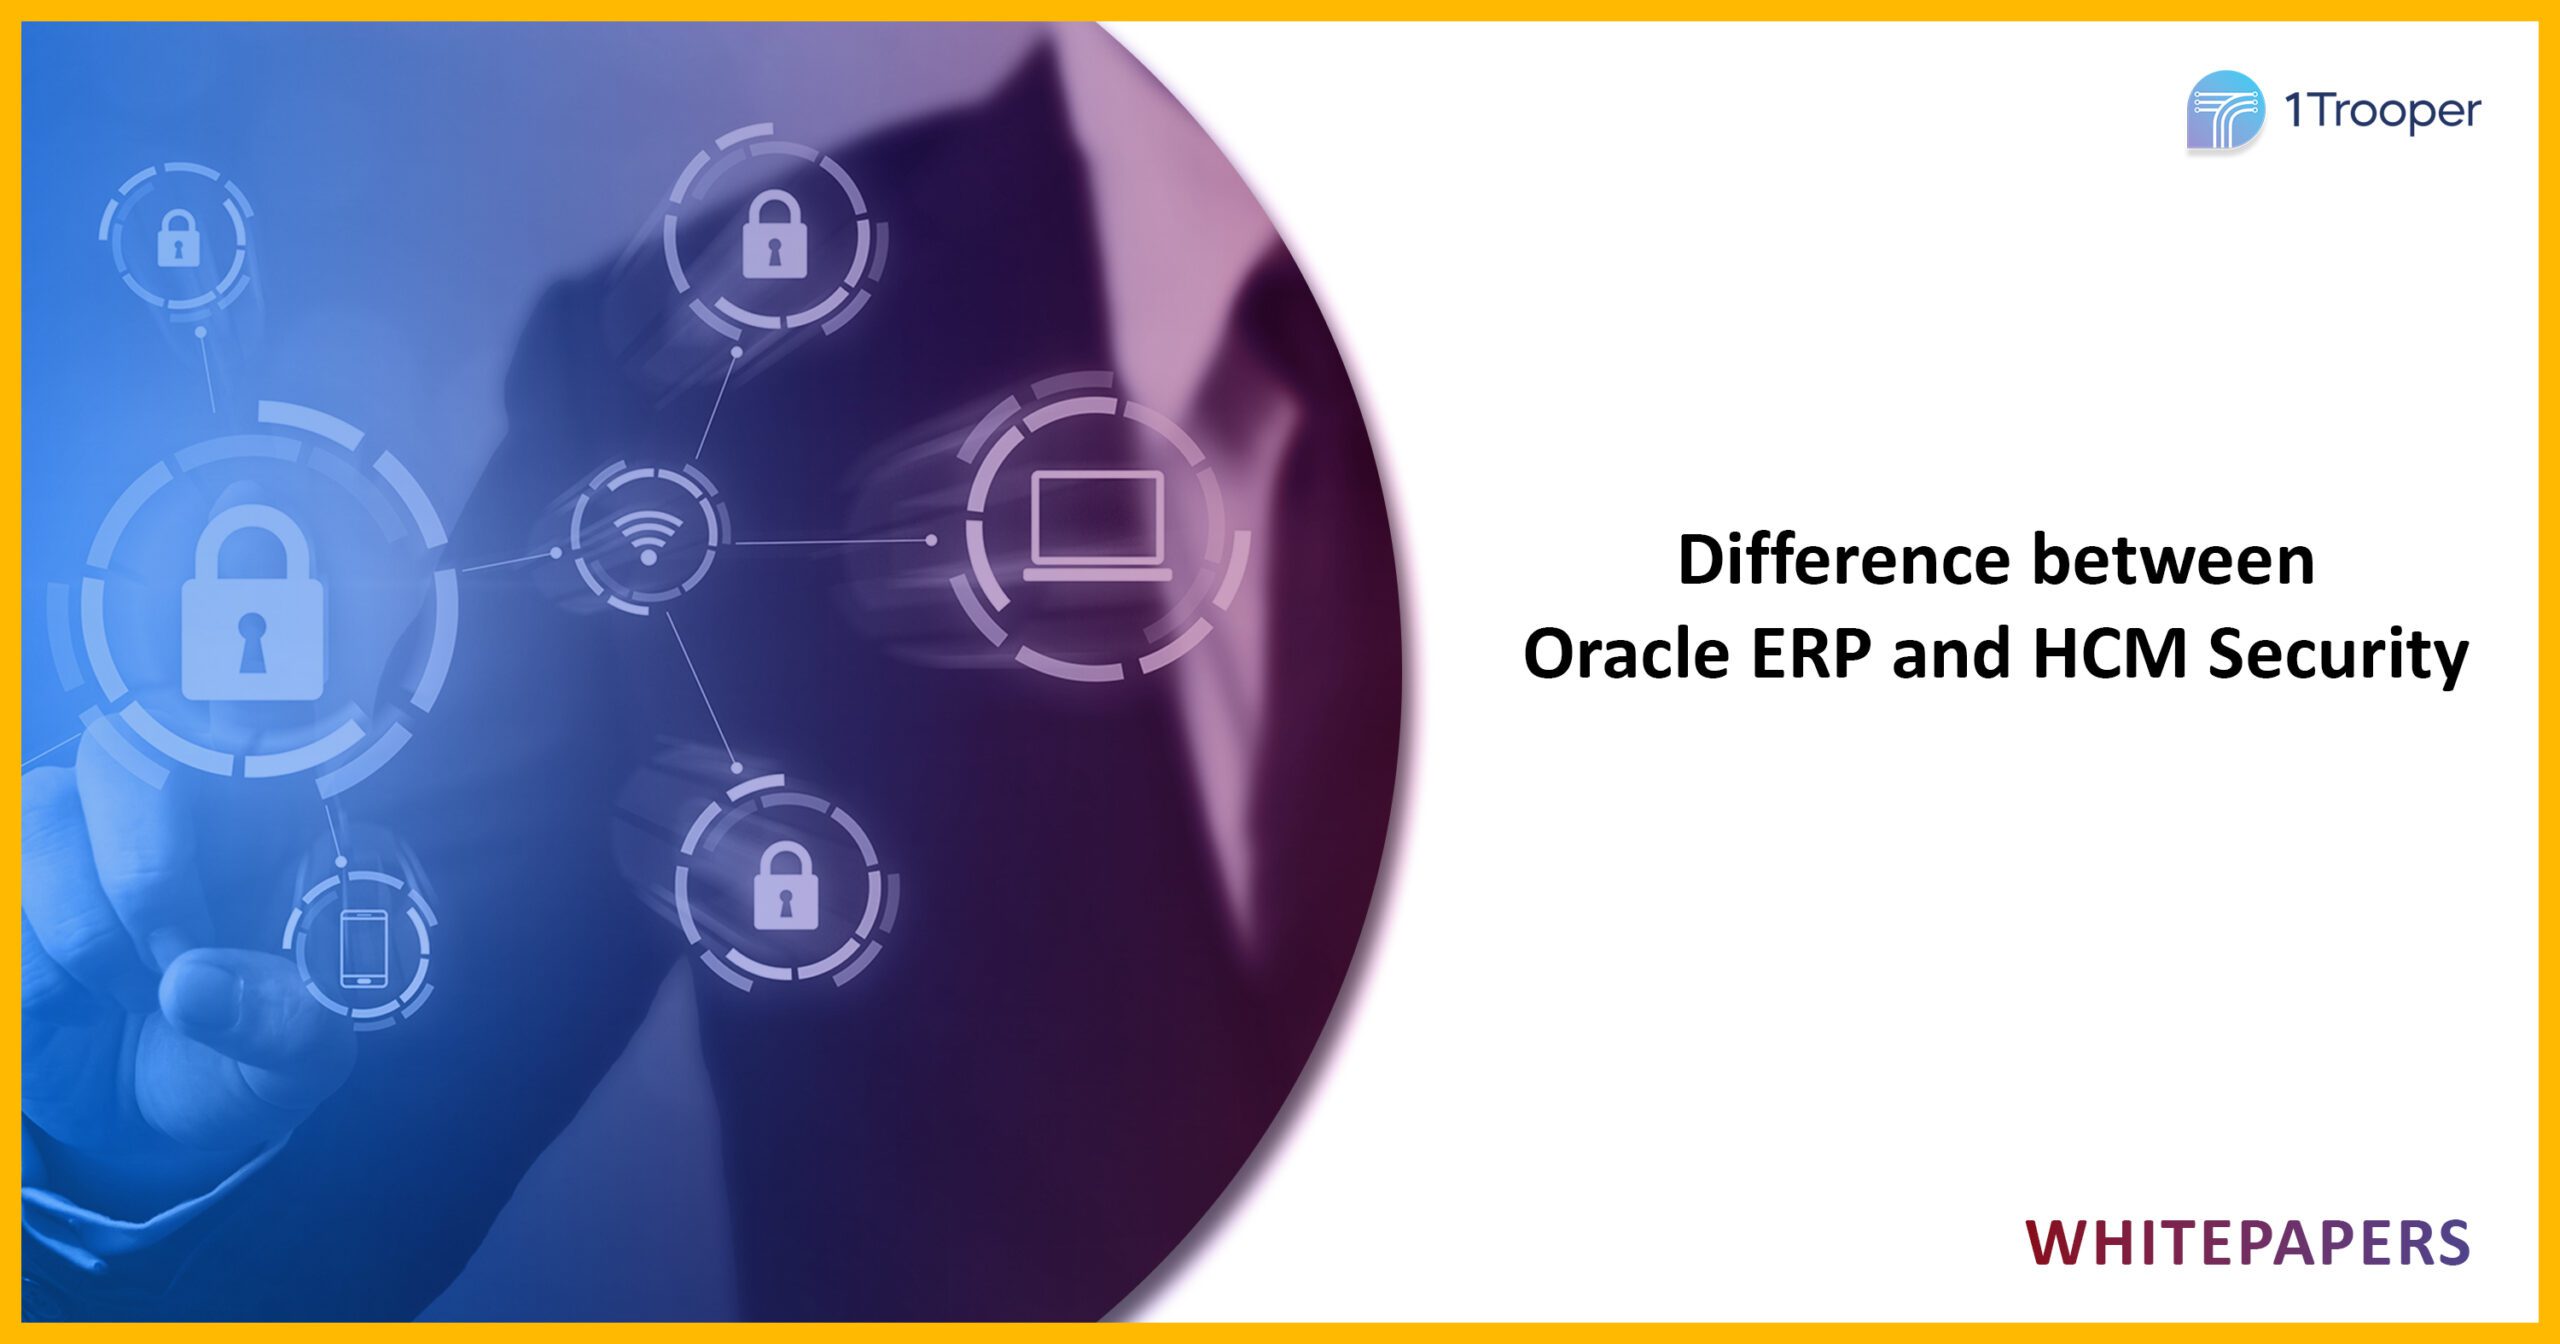 Difference Between Oracle ERP and HCM Security